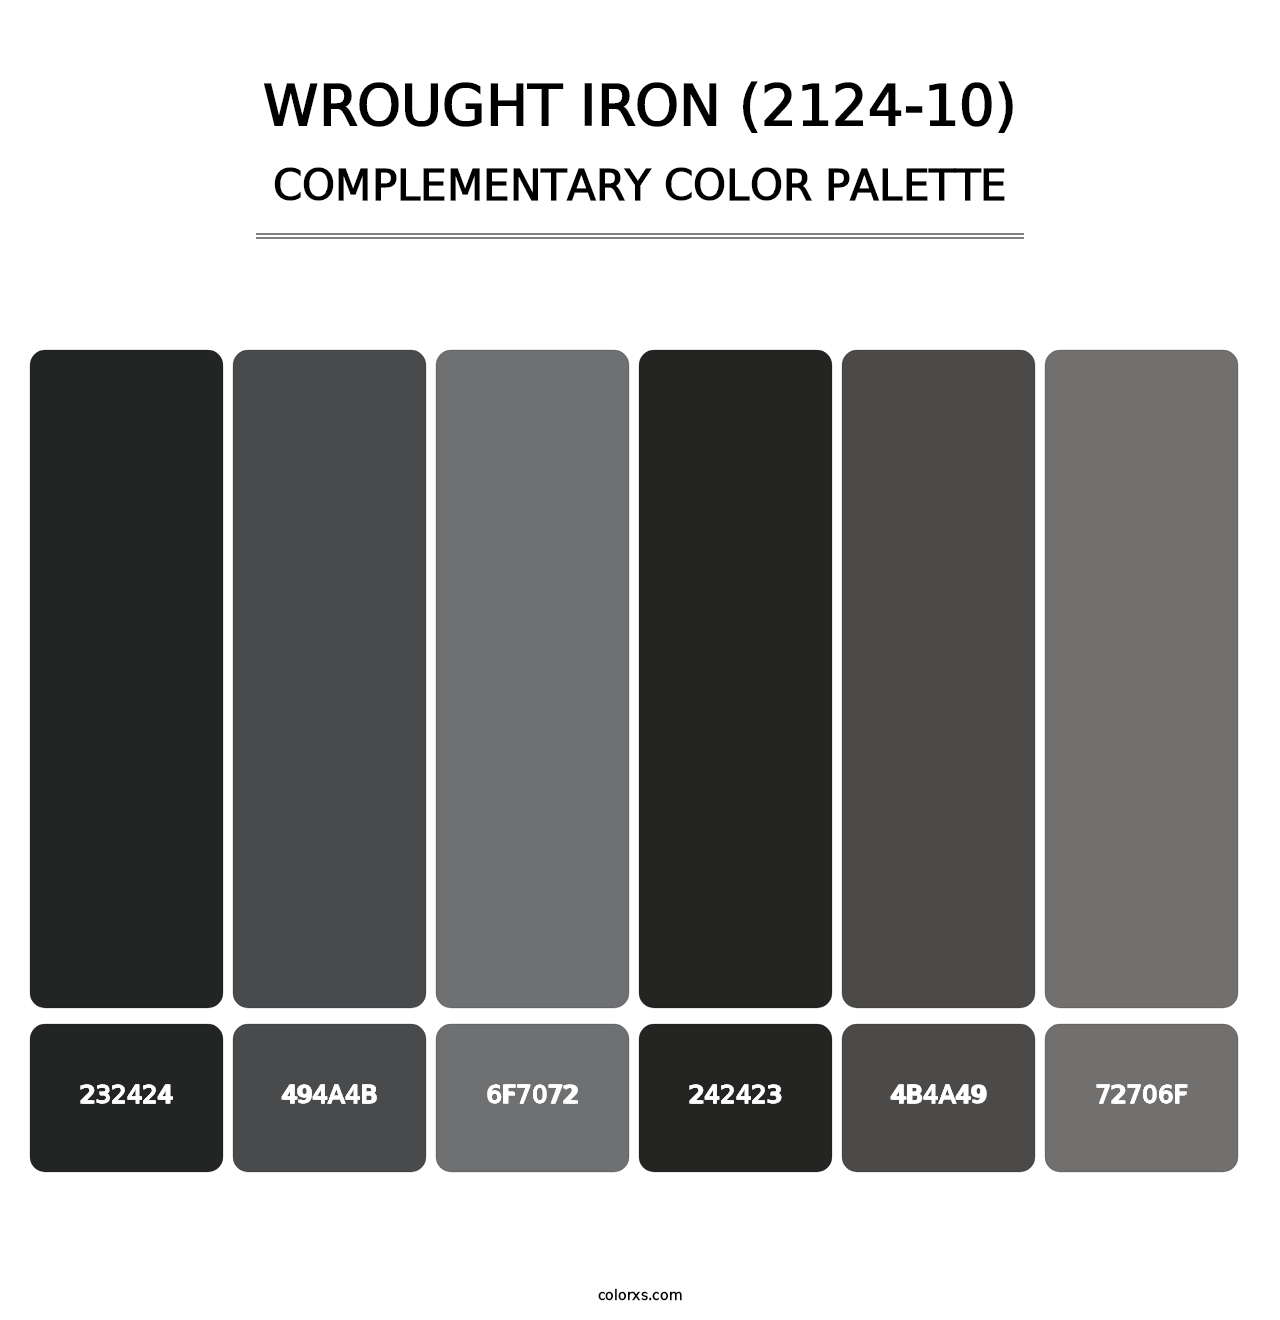 Wrought Iron (2124-10) - Complementary Color Palette